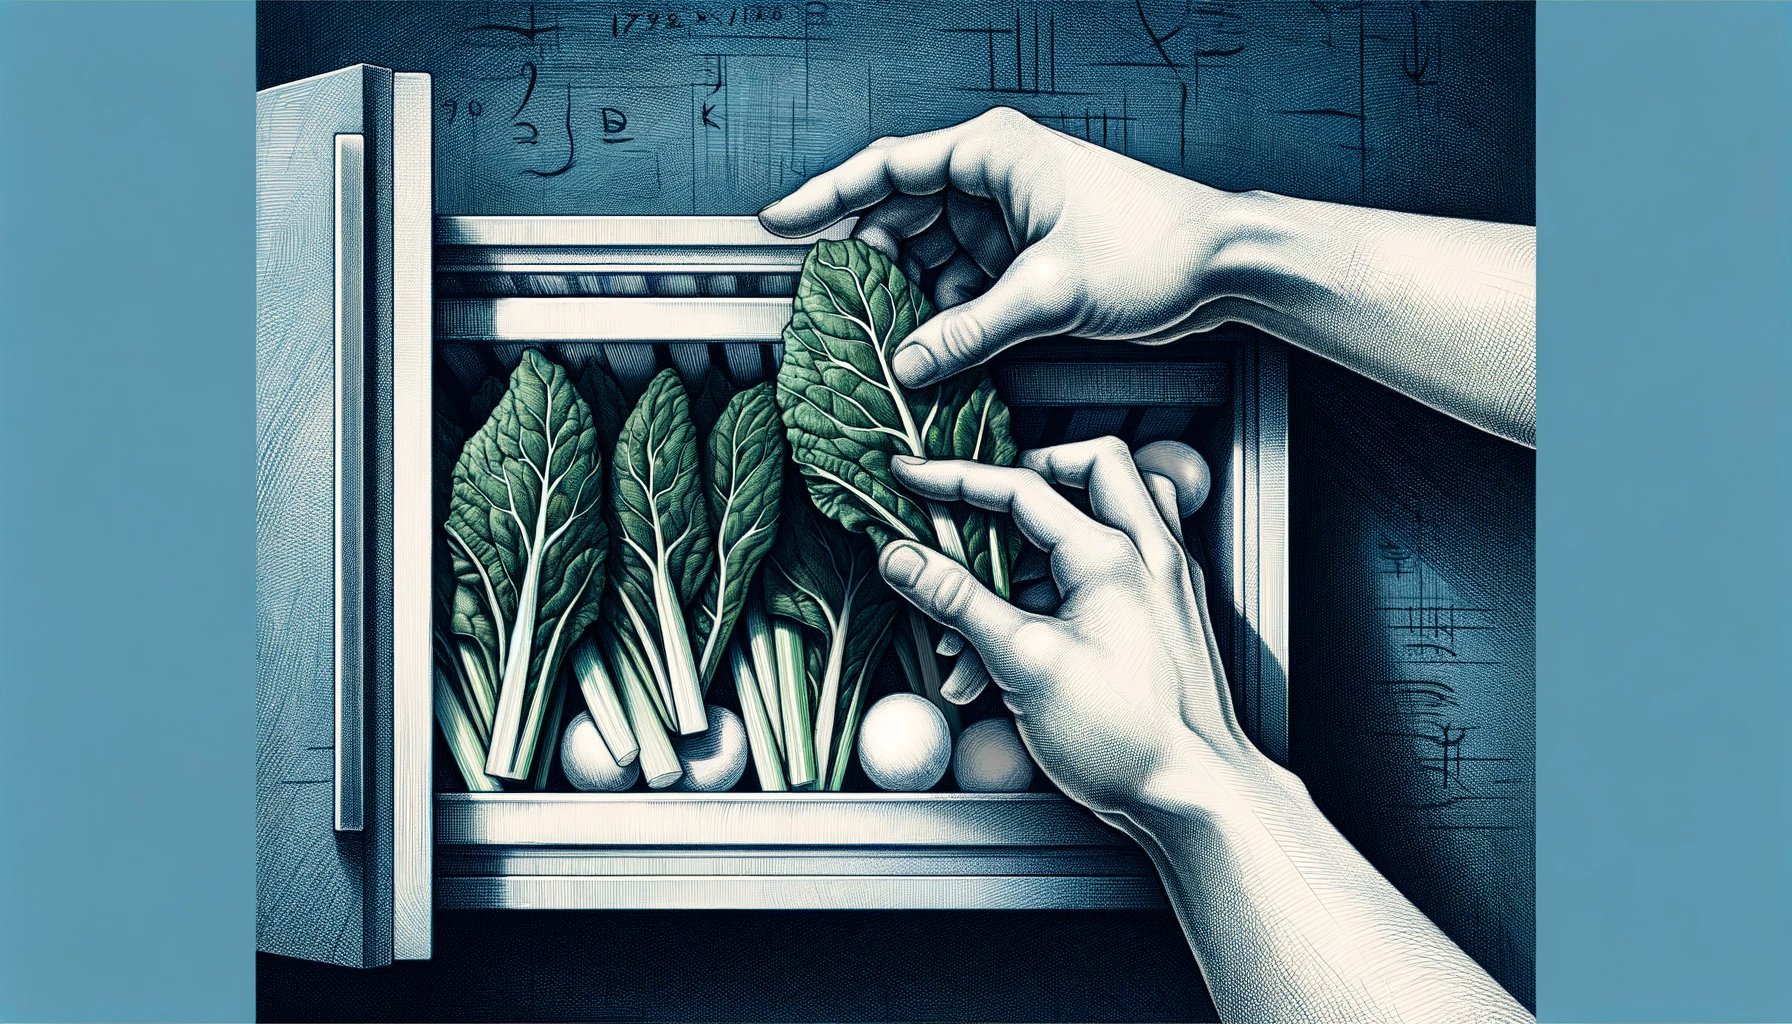 Frozen Collard Greens Being Placed Into A Freezer By Human Hands Set Against A Dark Blue Background